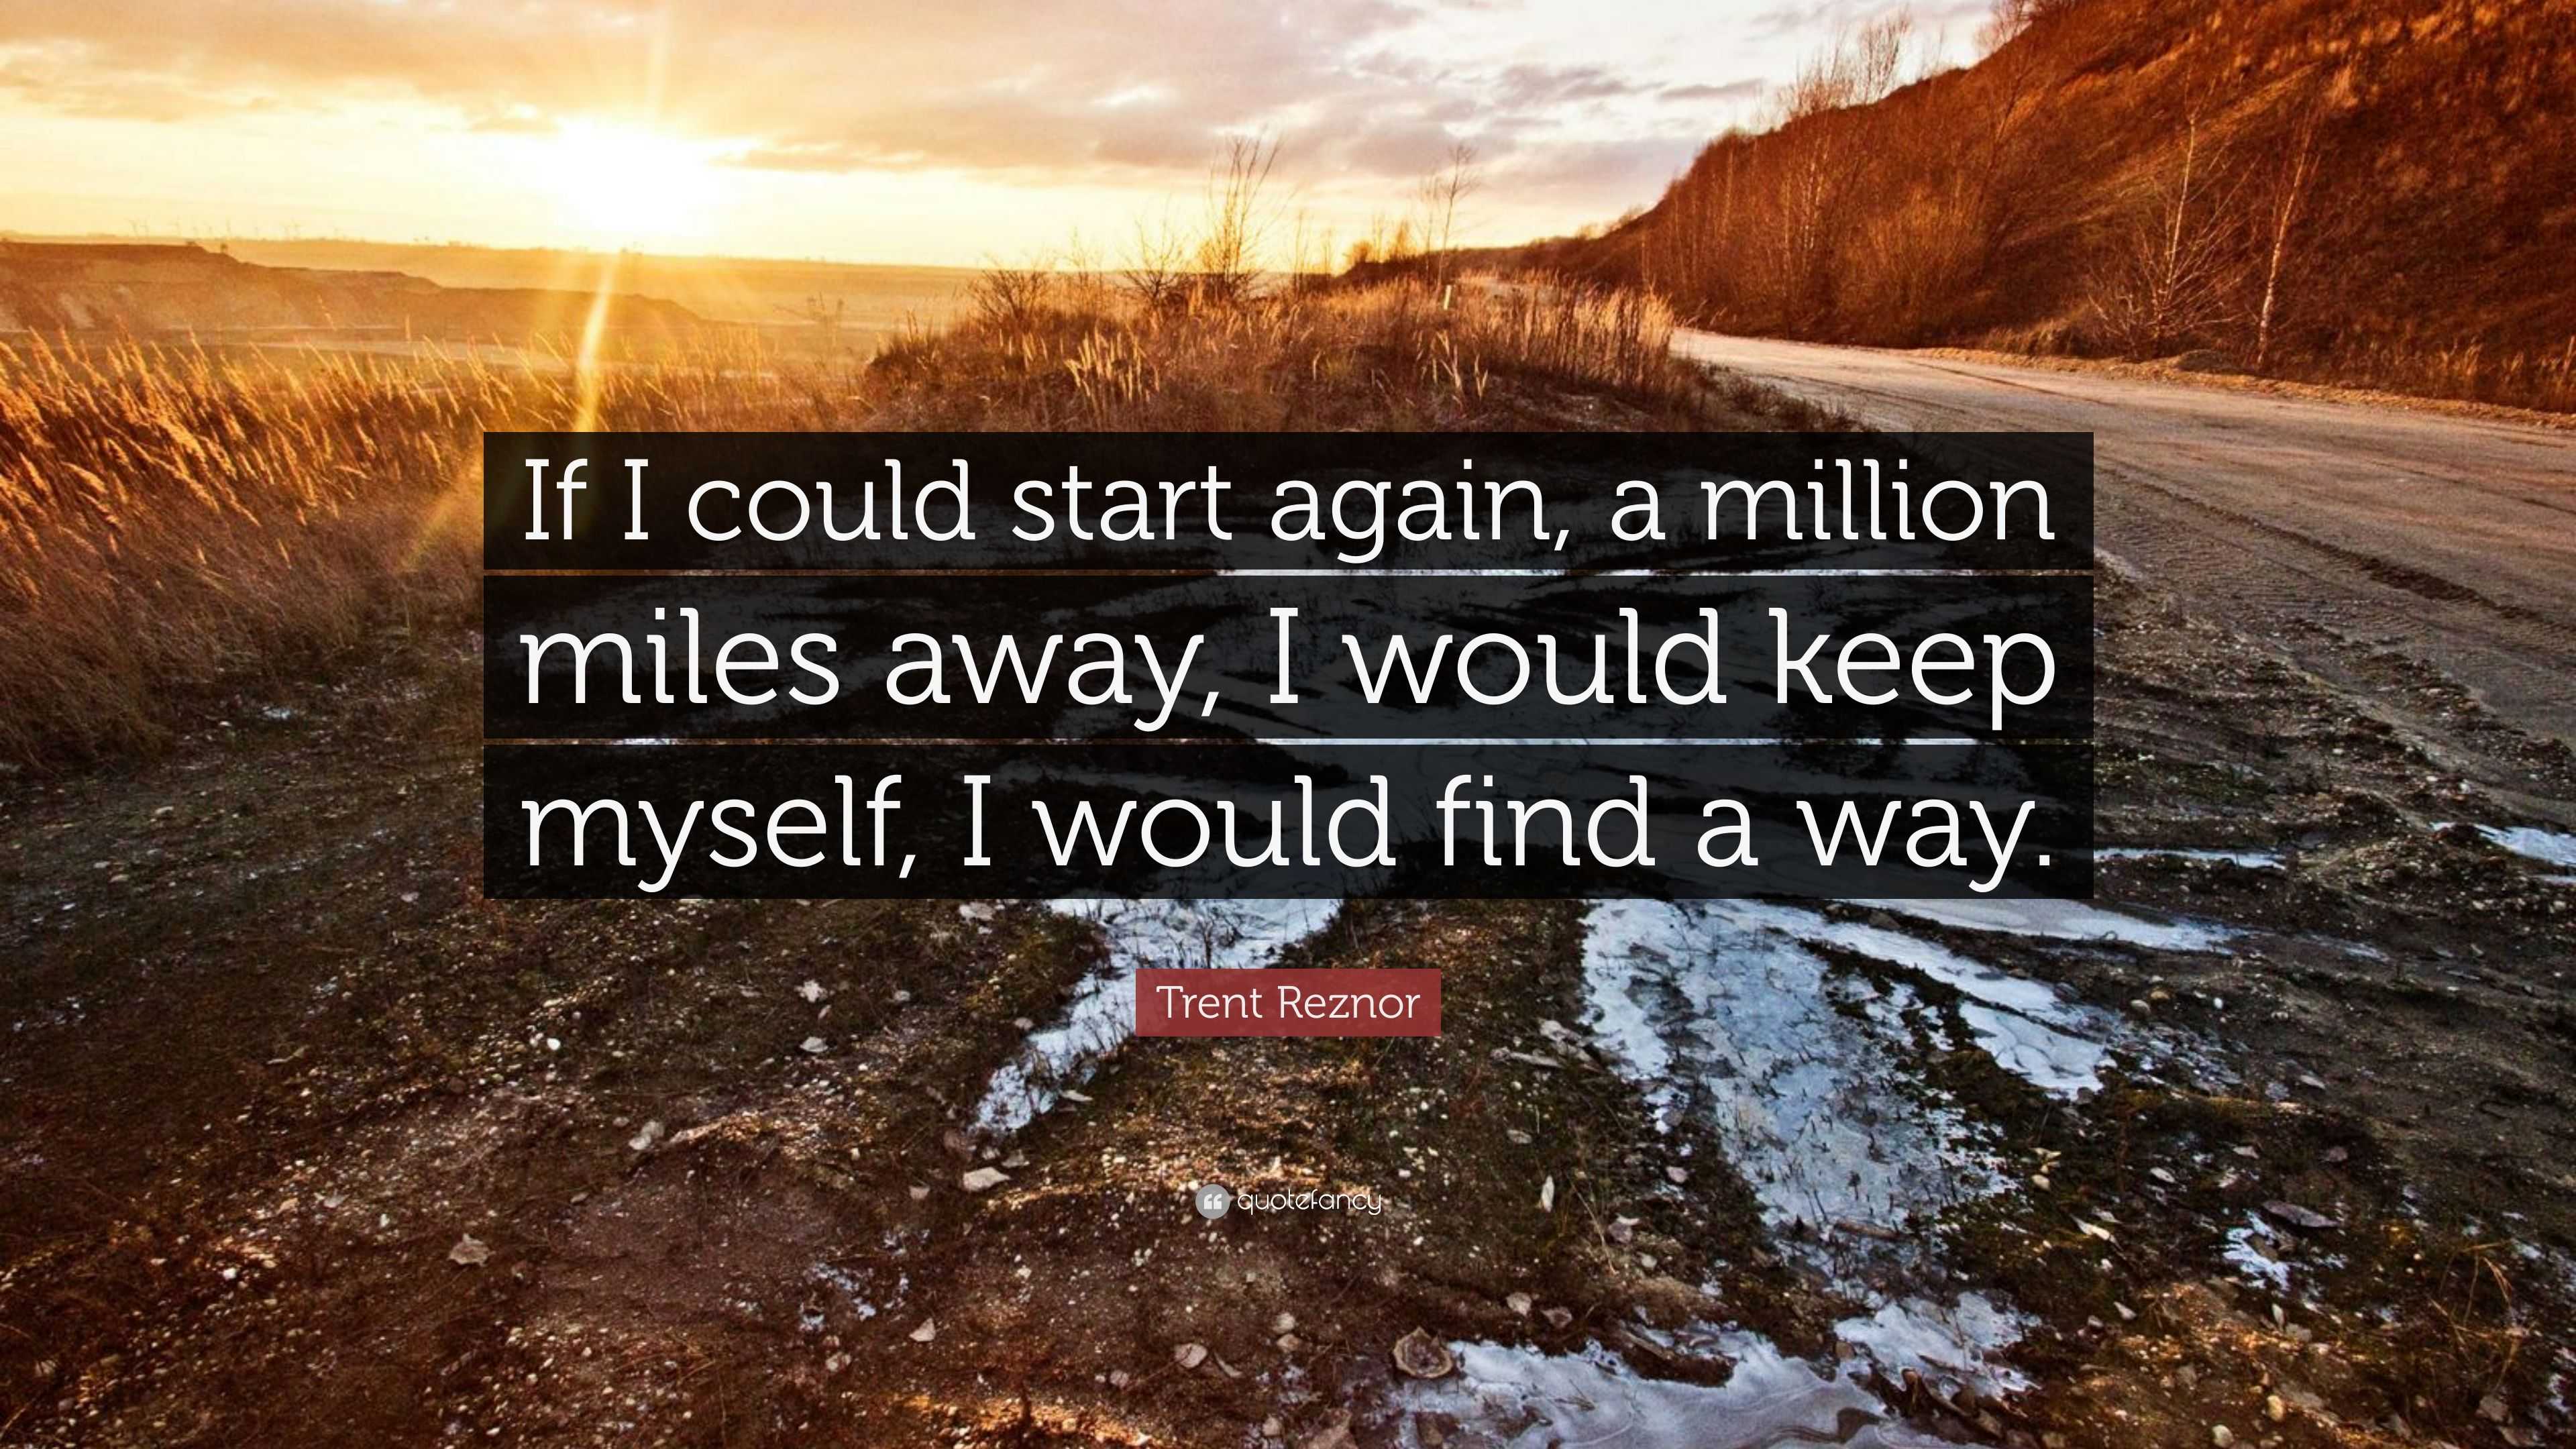 Trent Reznor Quote: “If I could start again, a million miles away, I ...